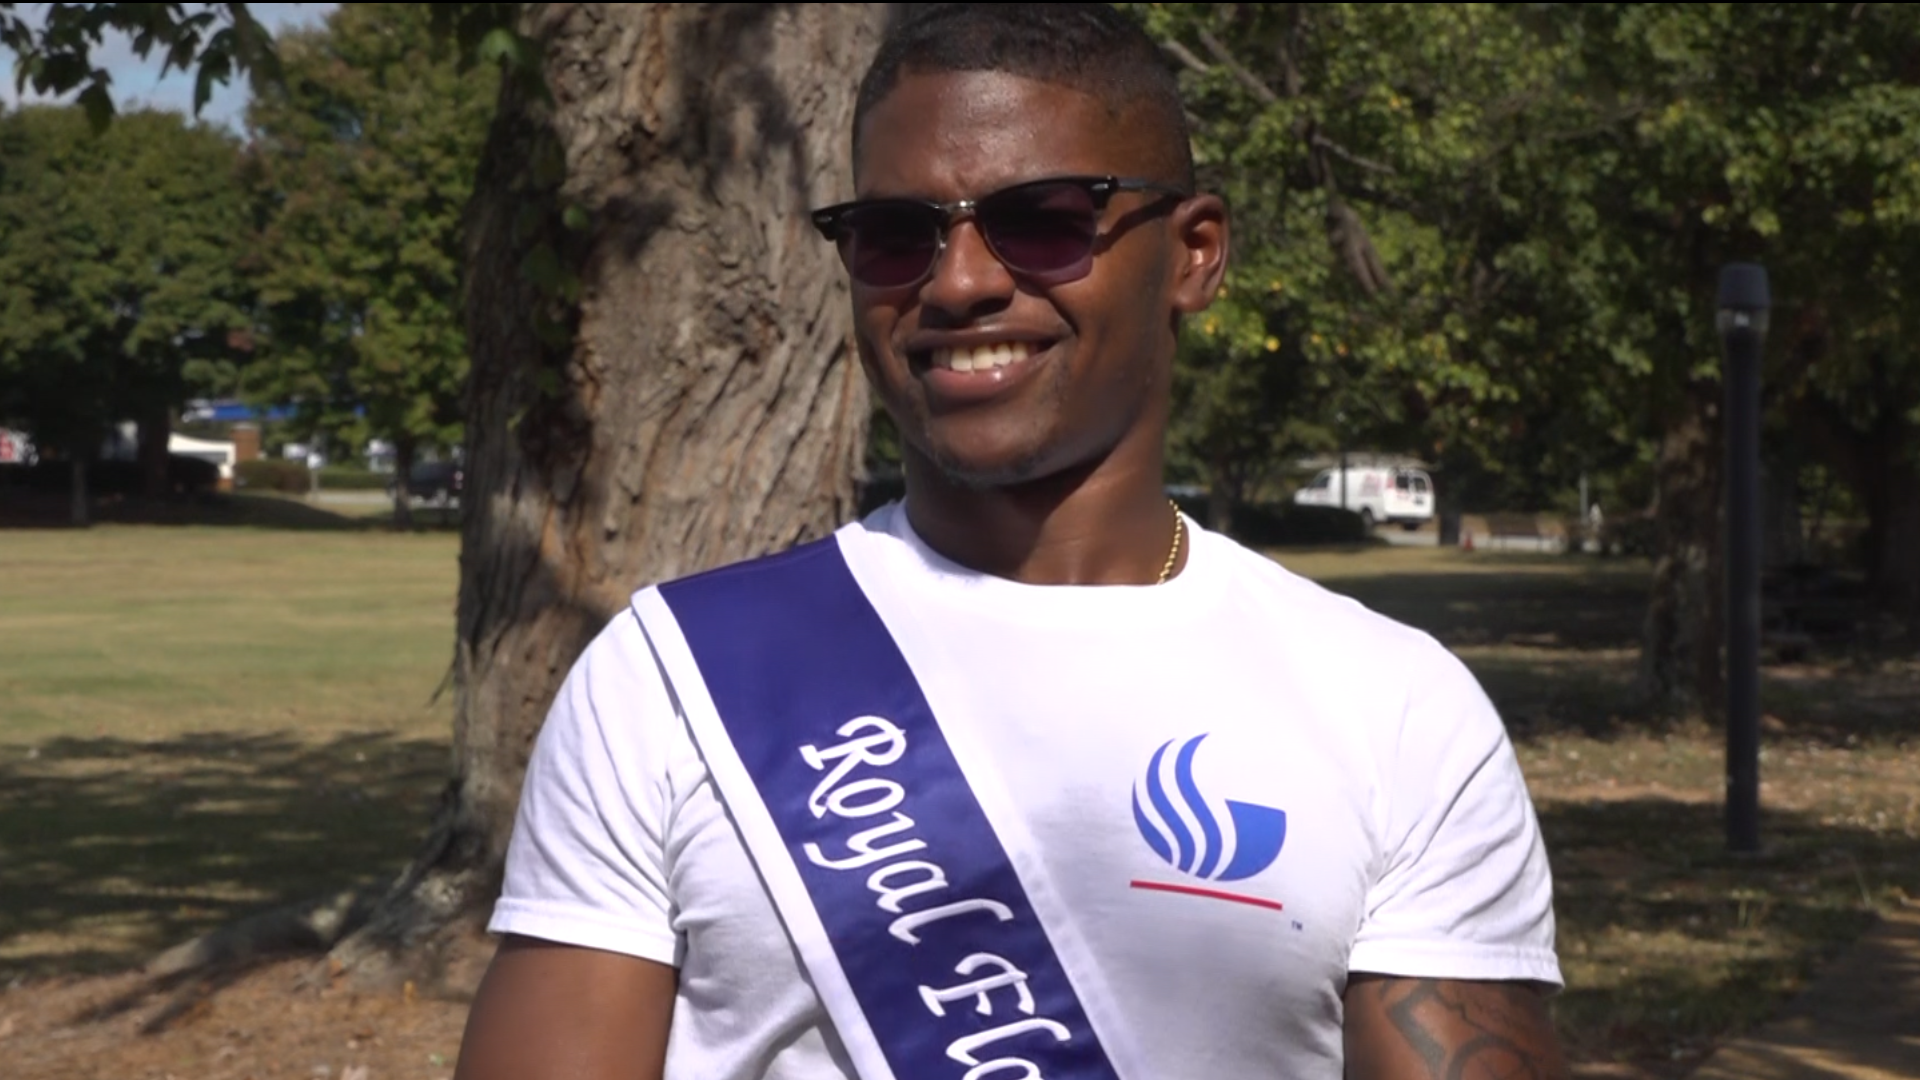 Demarco is the first black, deaf man to receive a homecoming title in Georgia State's history.